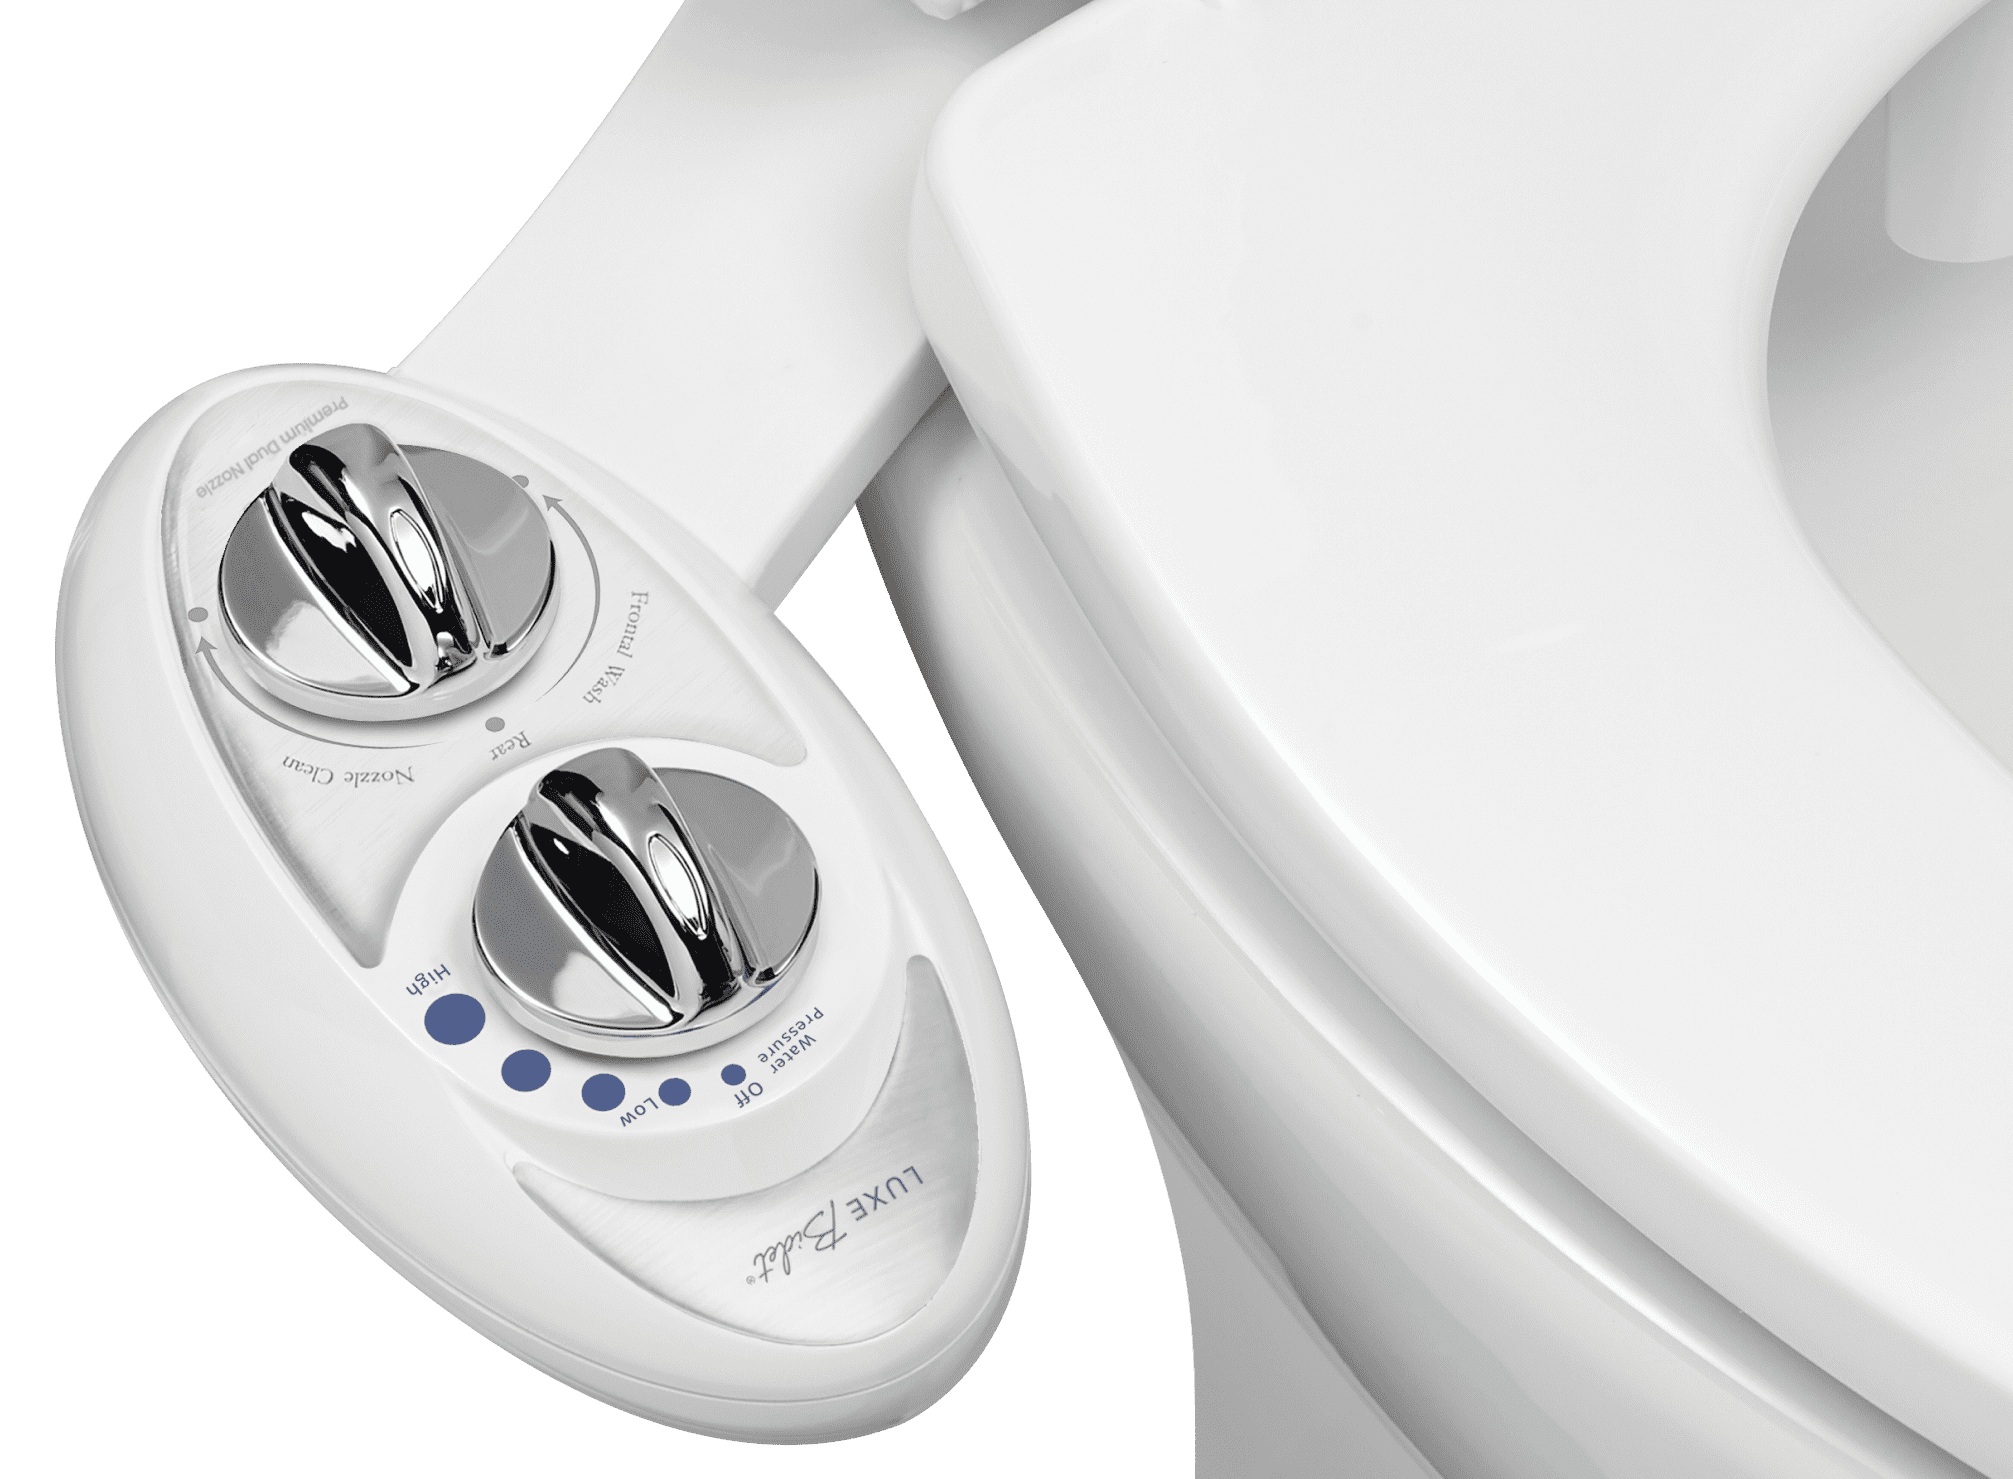  Clear Rear Bidet Attachment & LumiLux Toilet Light (1 pack) -  Transform Your Bathroom with Self-Cleaning Dual Nozzle Bidet - Enhance  Ambiance with 16-Color LED Motion-Sensing Toilet Bowl Light : Tools